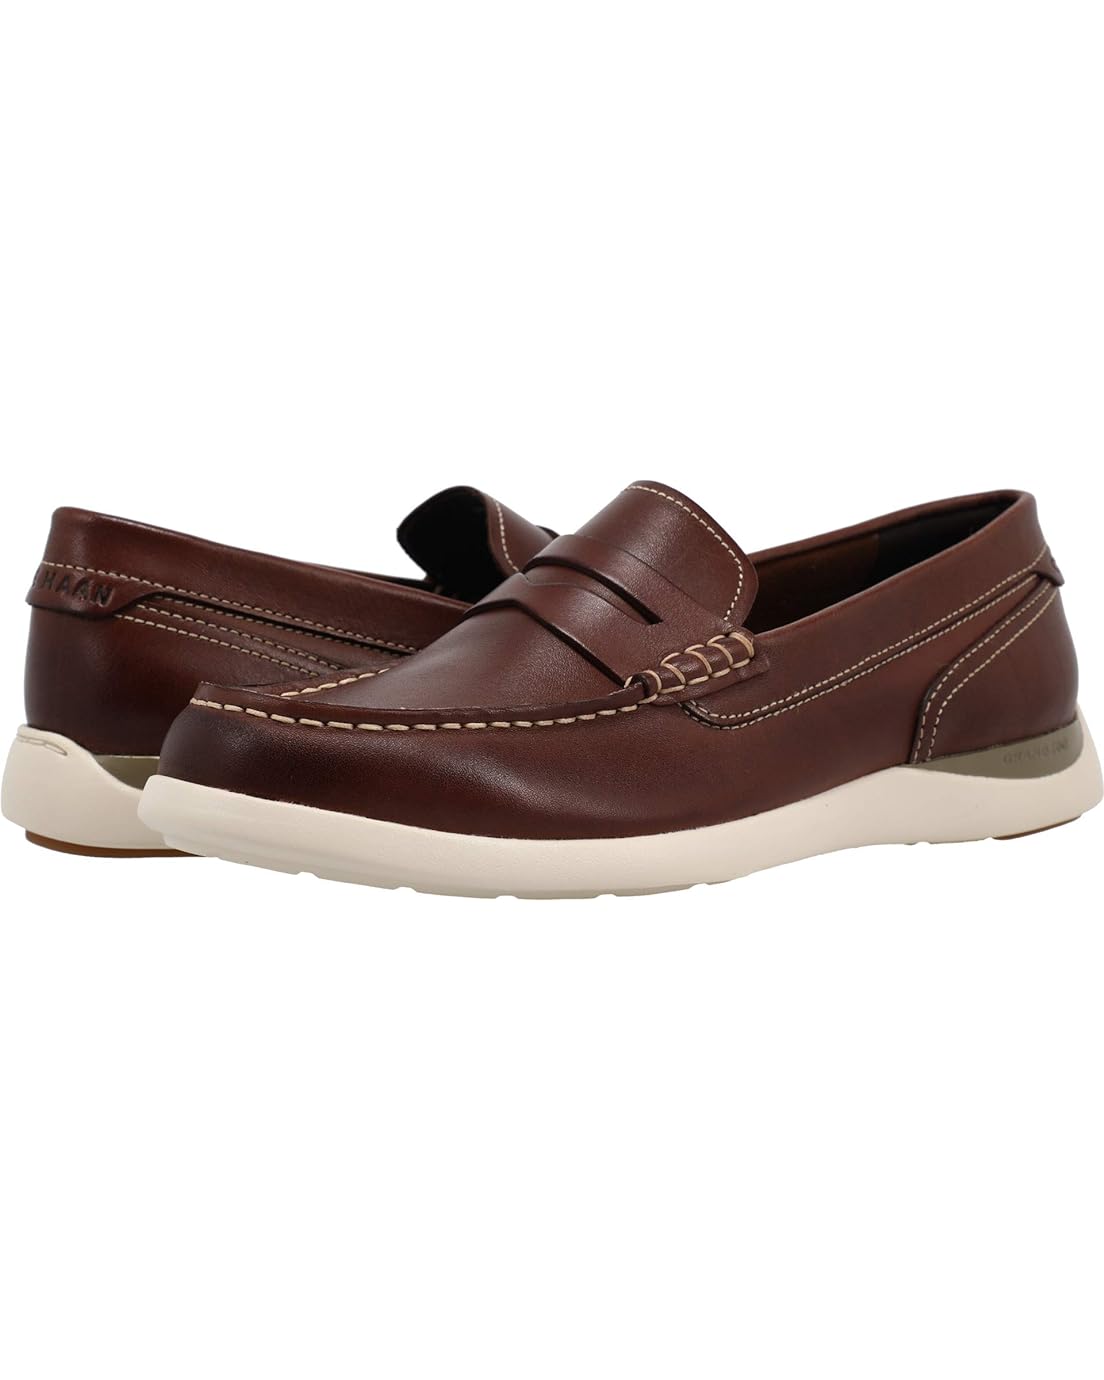 Cole Haan Grand Atlantic Penny Loafer